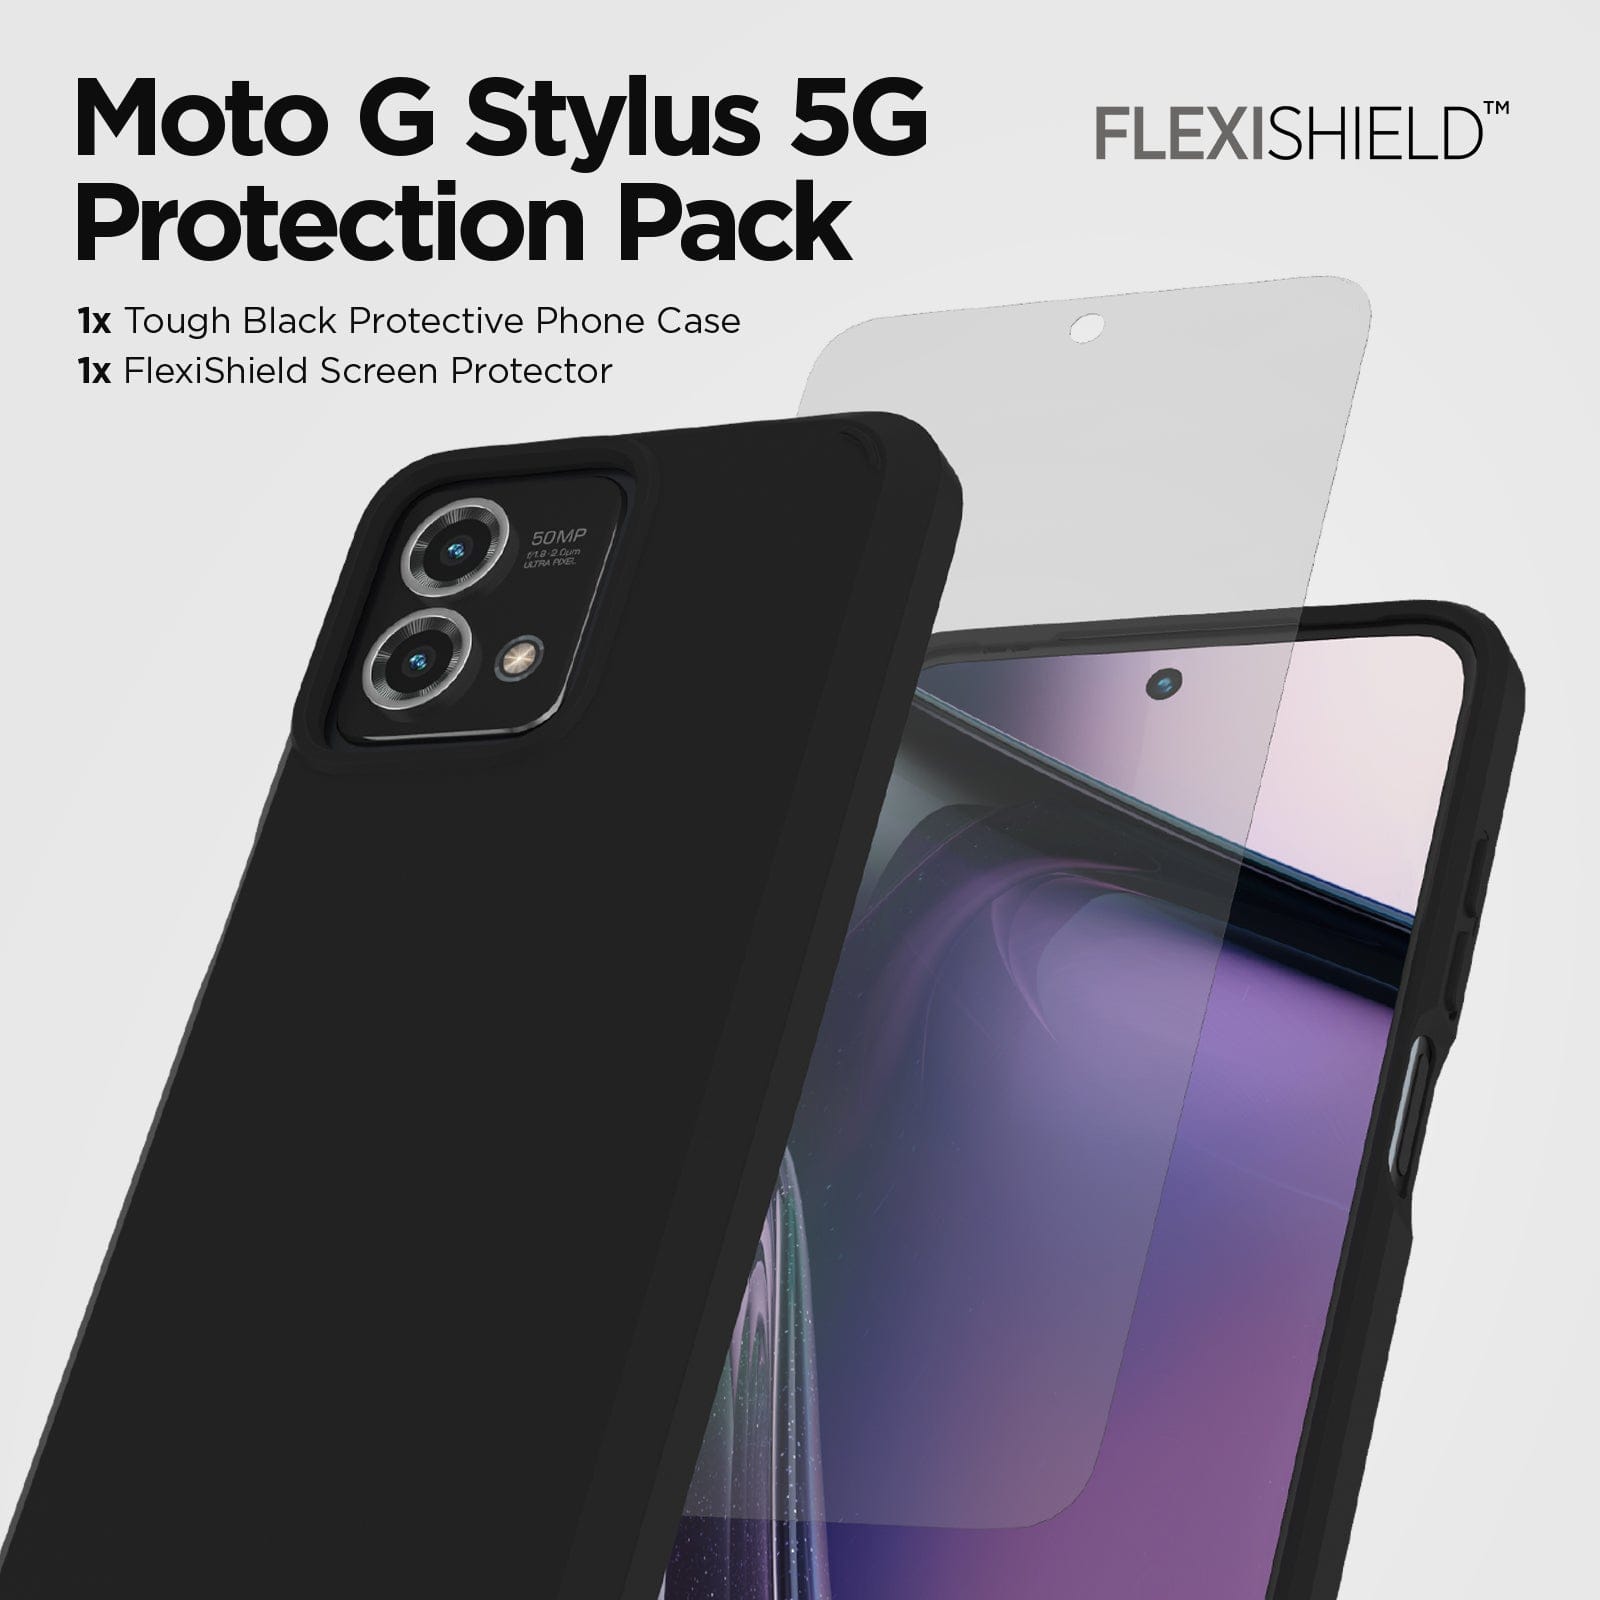 Moto G Stylus 5G Protection Pack. 1x Tough Black Protective Phone Case. 1x Flexishield Screen Protector. 